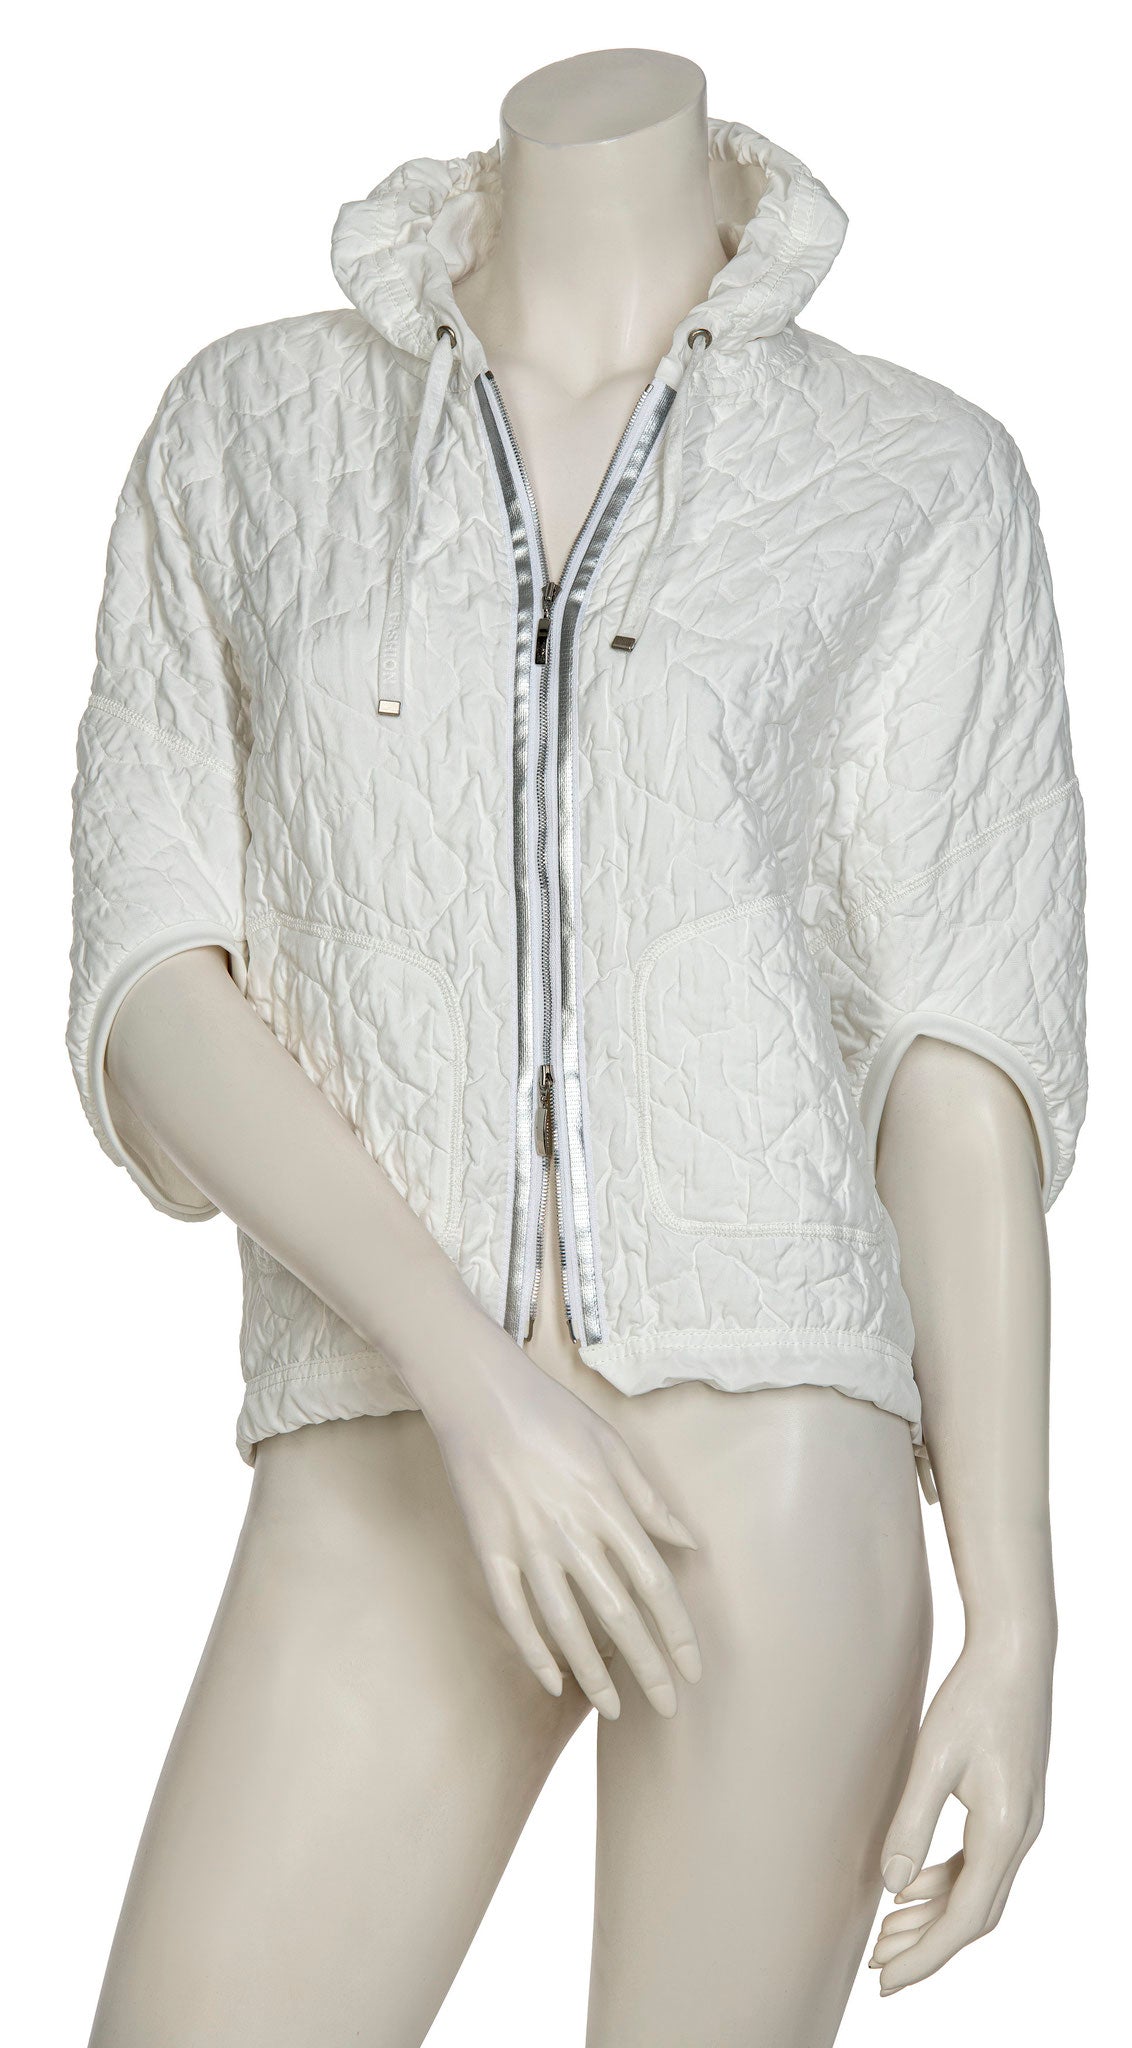 Front view of the beate heymann padded vest in off-white